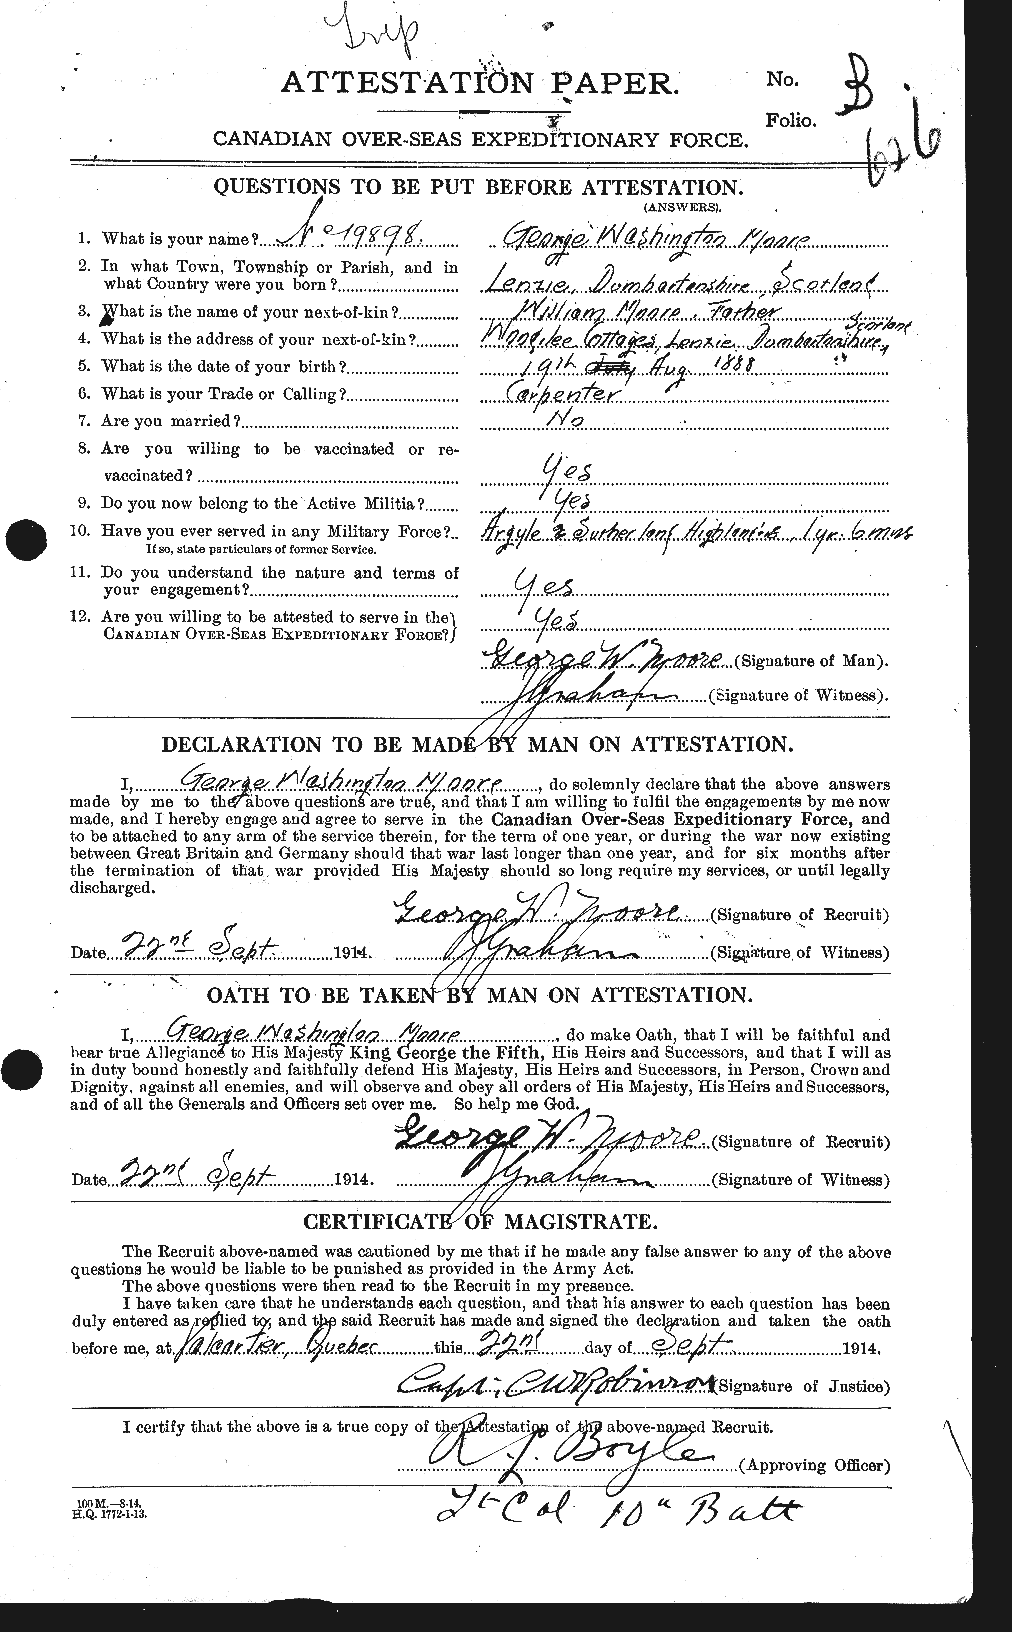 Personnel Records of the First World War - CEF 502026a